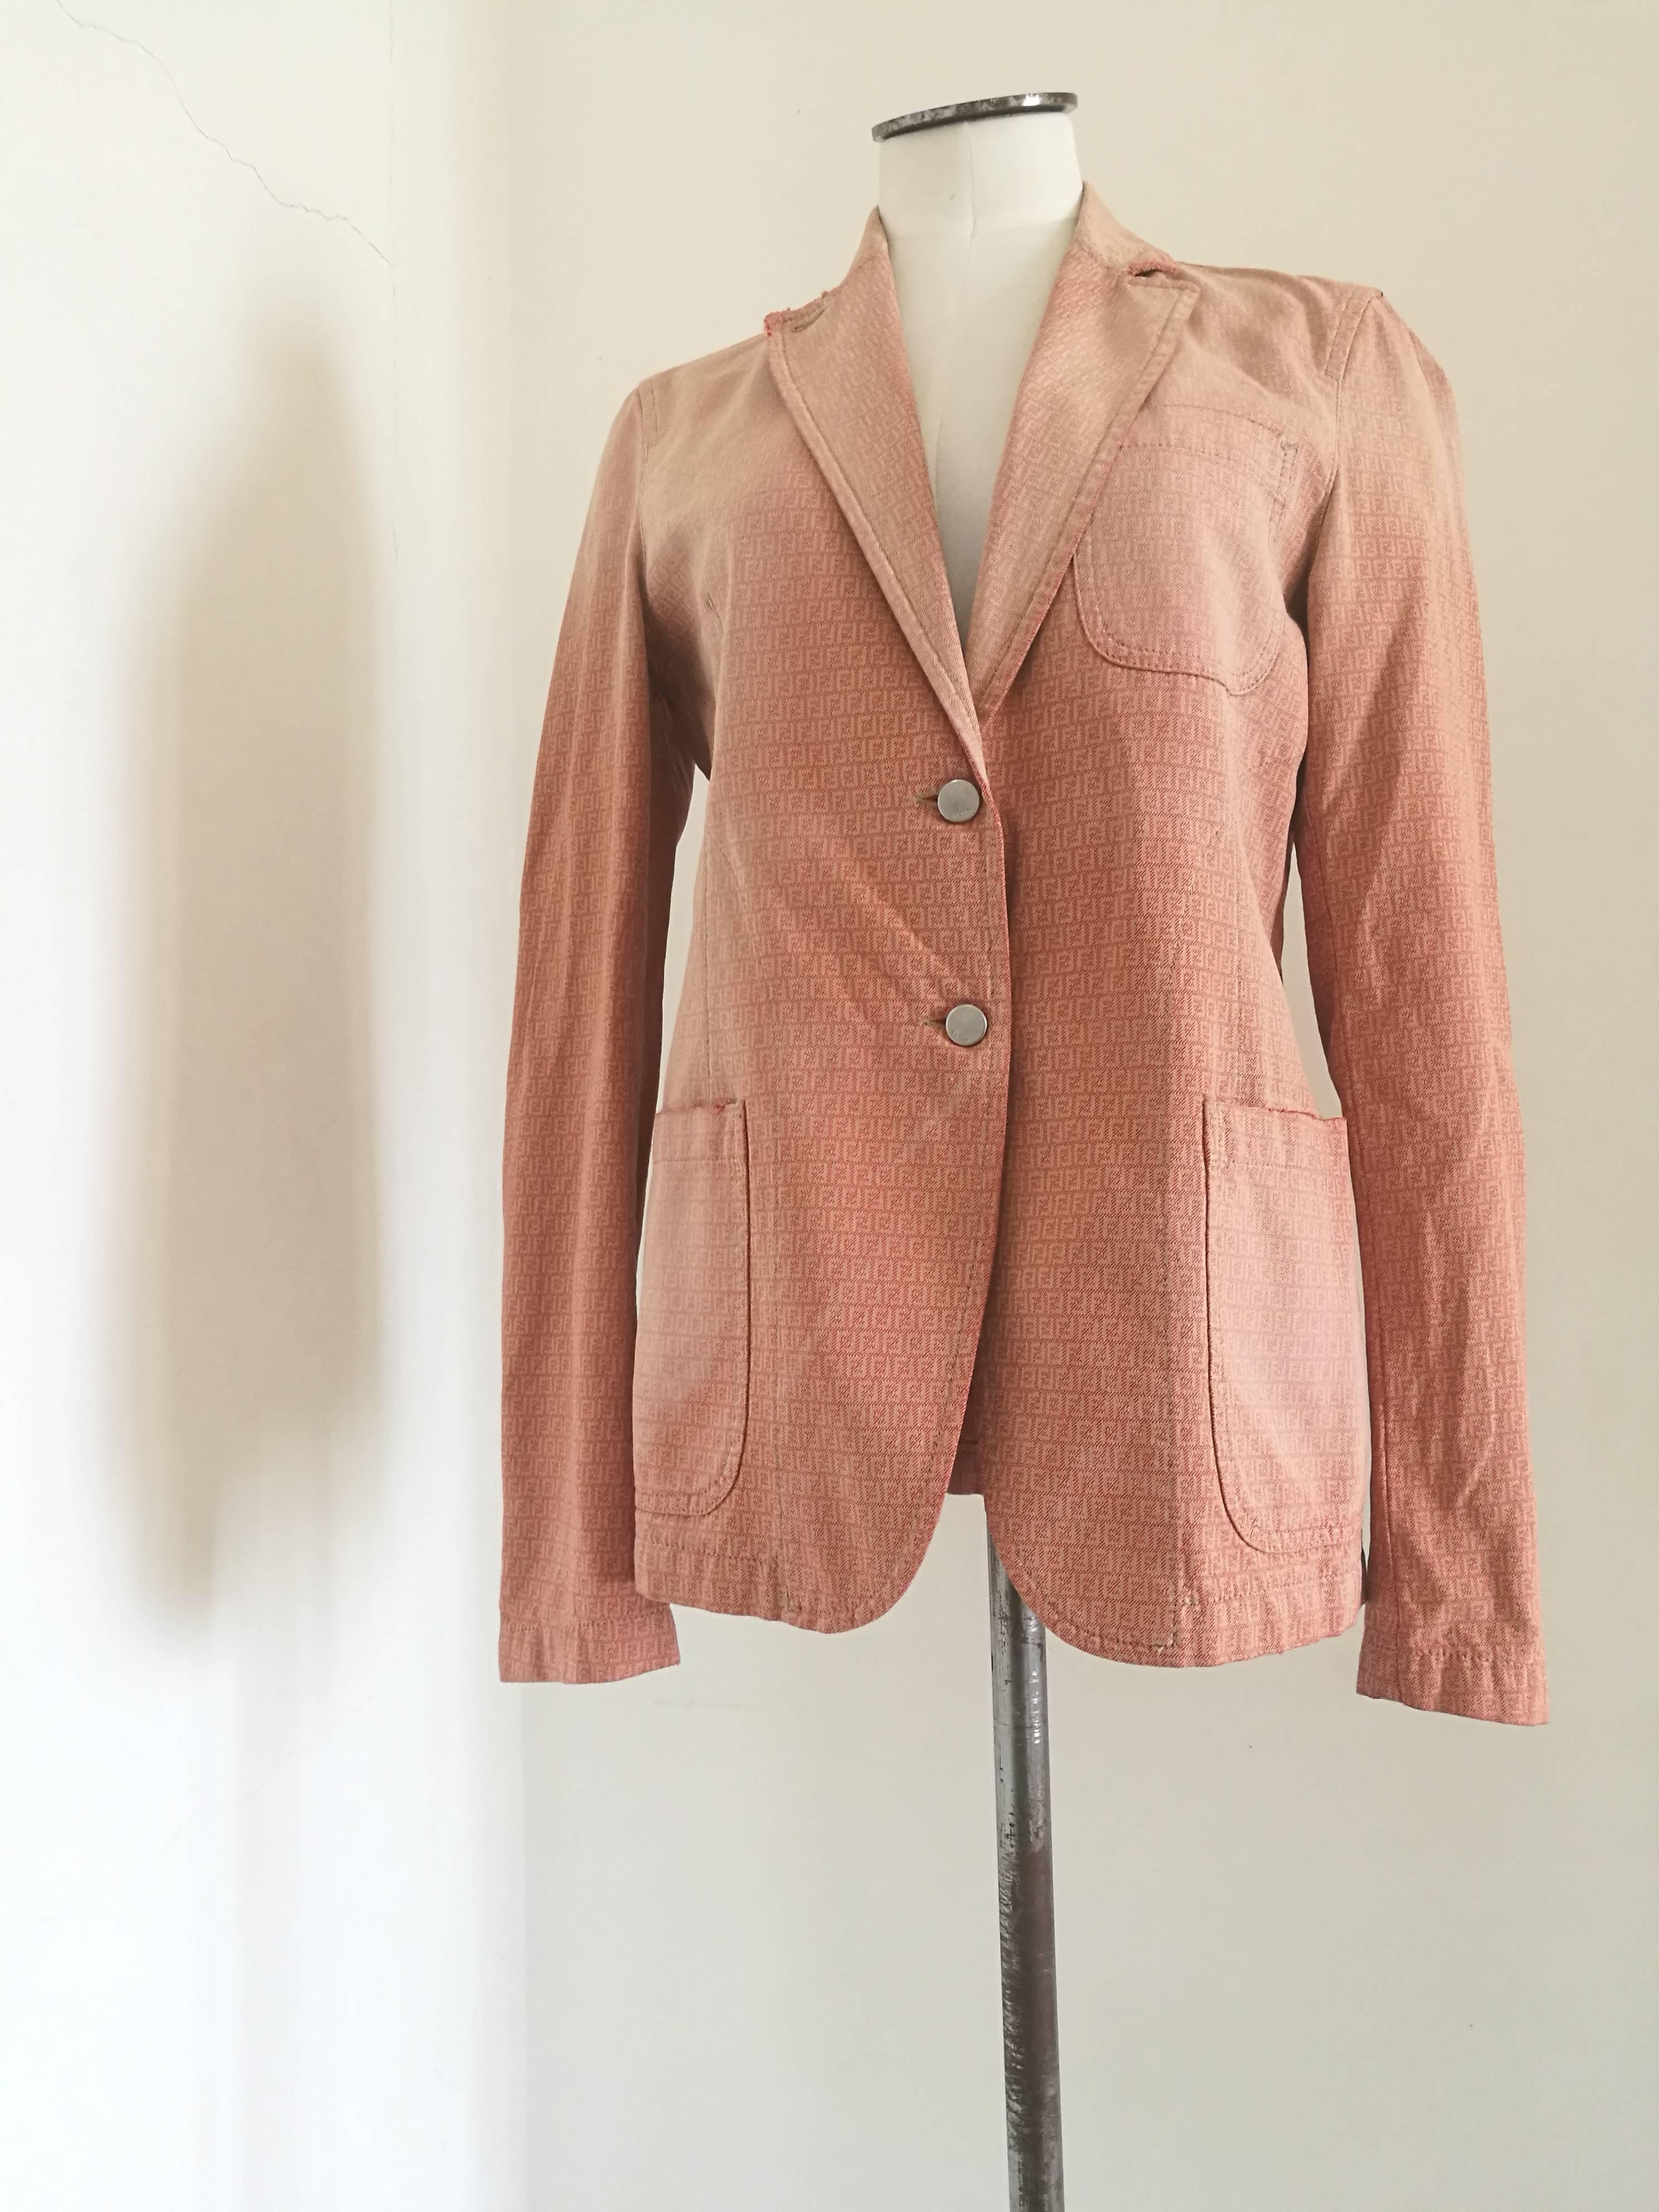 Fendi FF Logo Pink Cotton Jacket

Totally made in italy in Size Standard M 